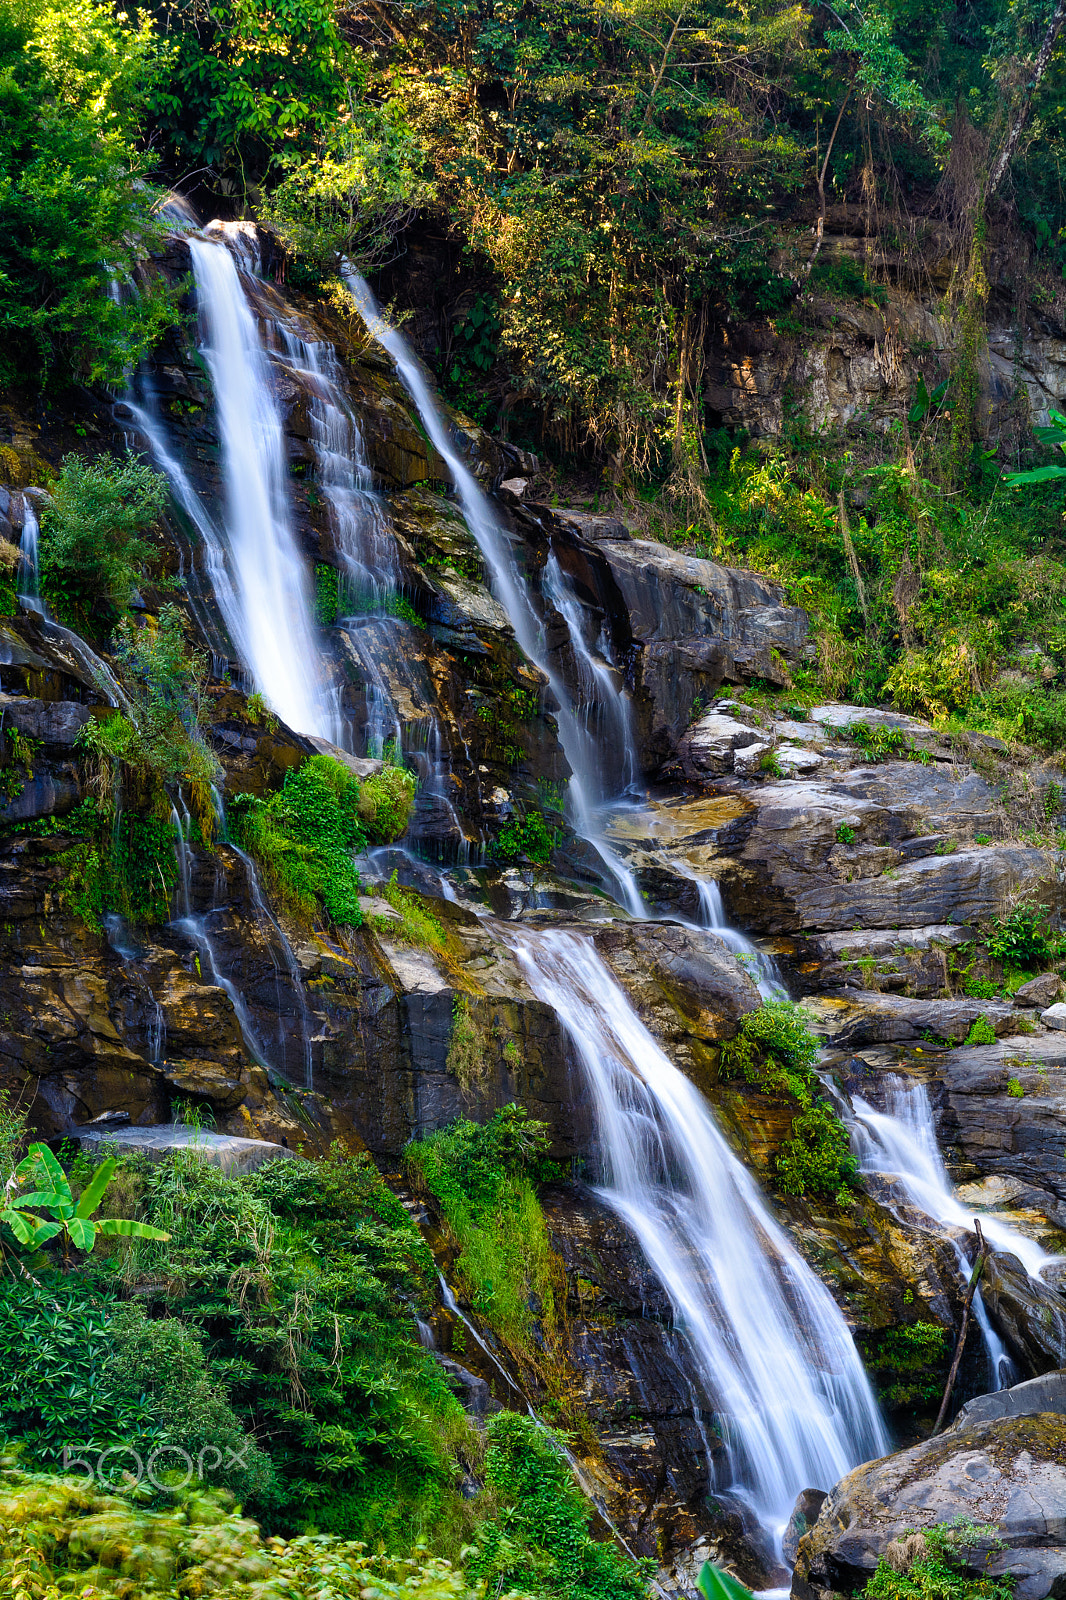 Nikon D5200 + Sigma 17-70mm F2.8-4 DC Macro OS HSM | C sample photo. Waterfall in the green tropical forest. photography